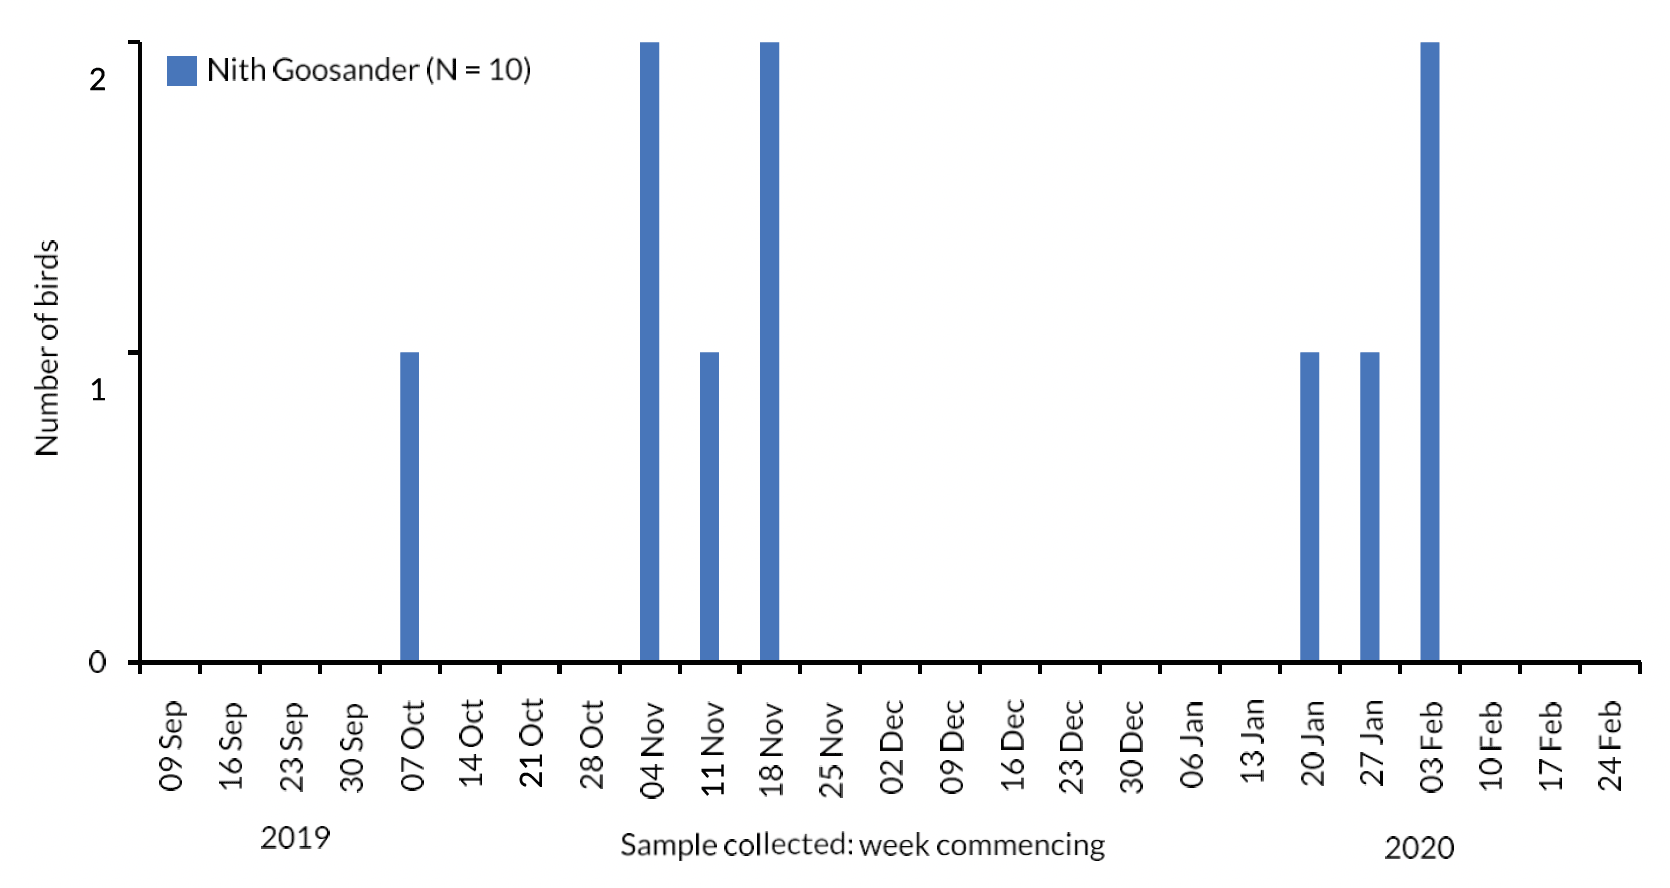 Bar chart of the number of River Nith Goosanders collected each week during the autumn-winter period 2019/20.